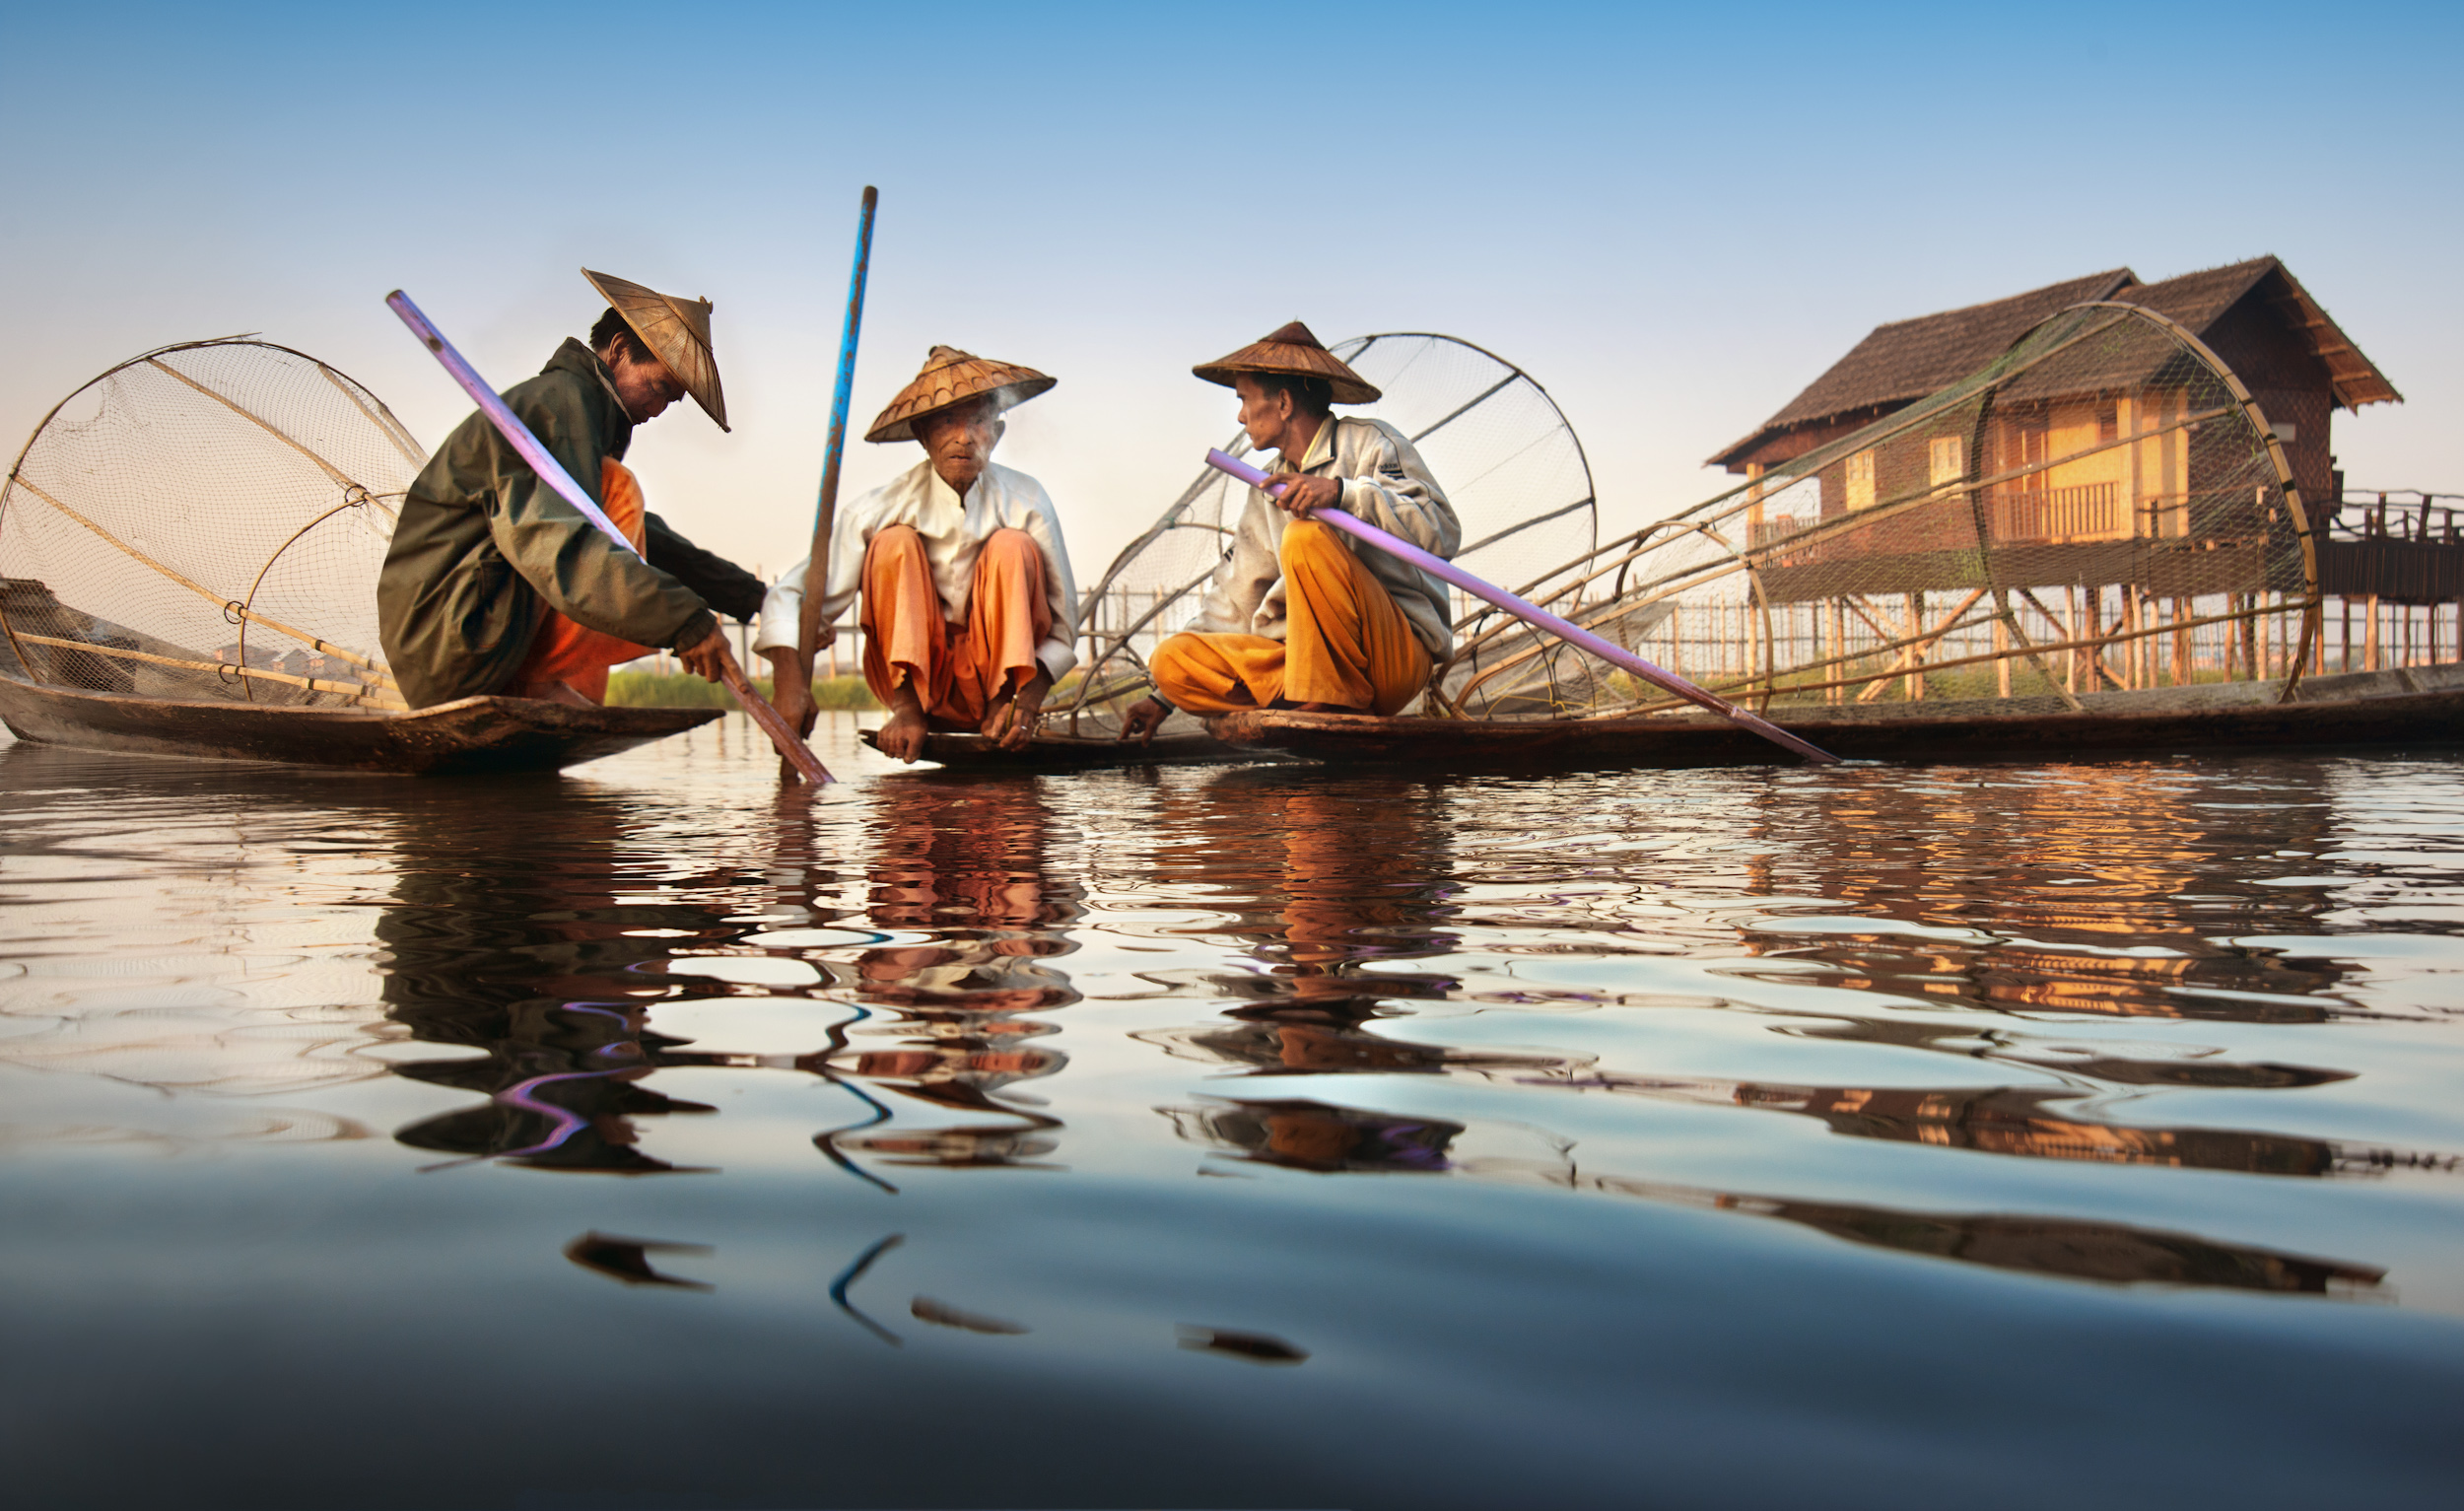 Three fishermen with conical hats squatting on their boats and chatting